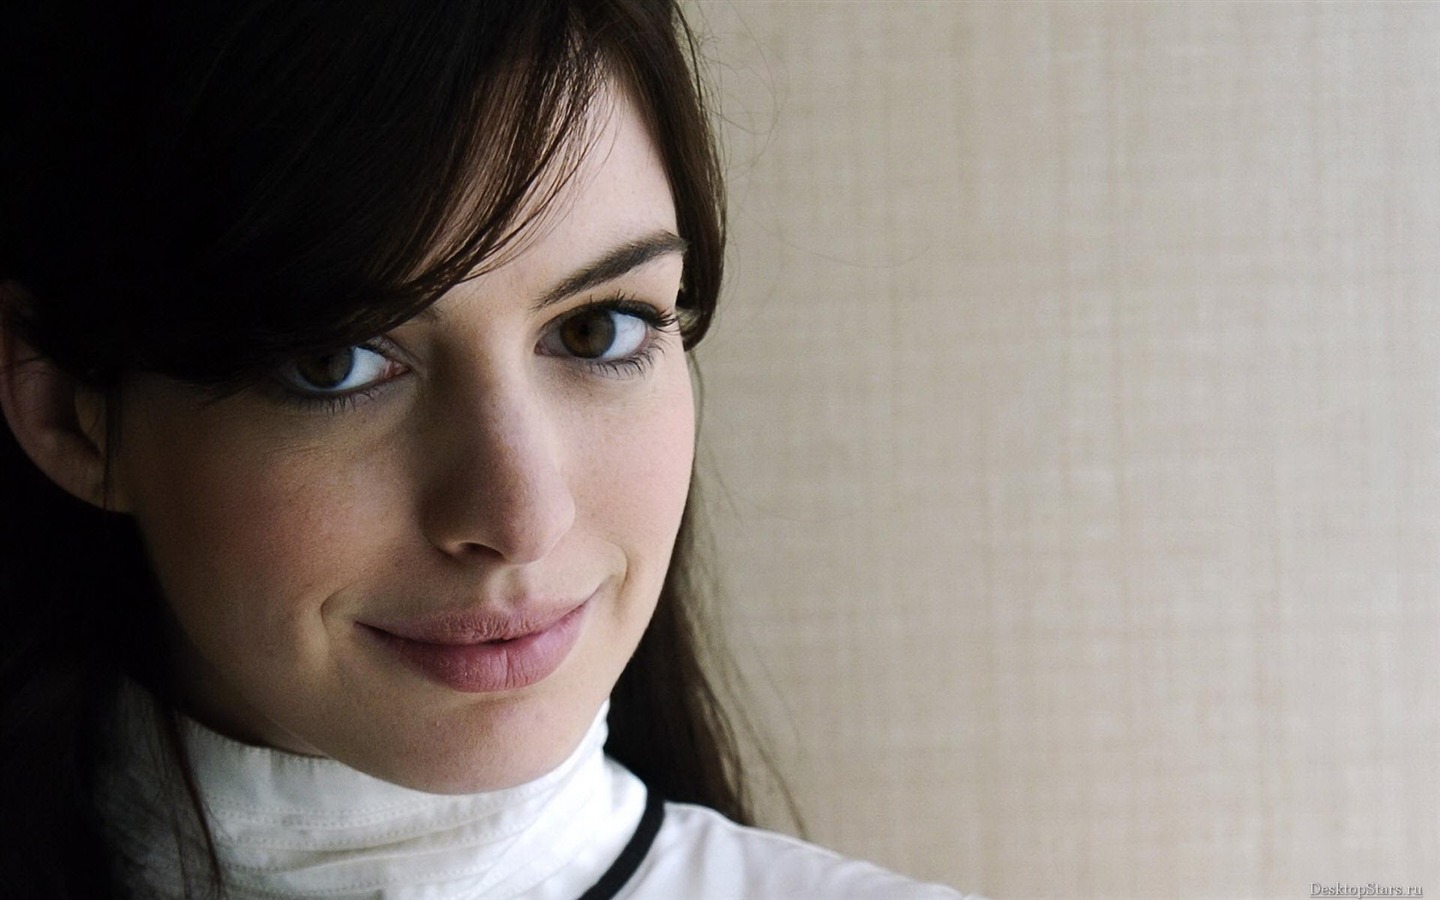 Anne Hathaway #004 - 1440x900 Wallpapers Pictures Photos Images